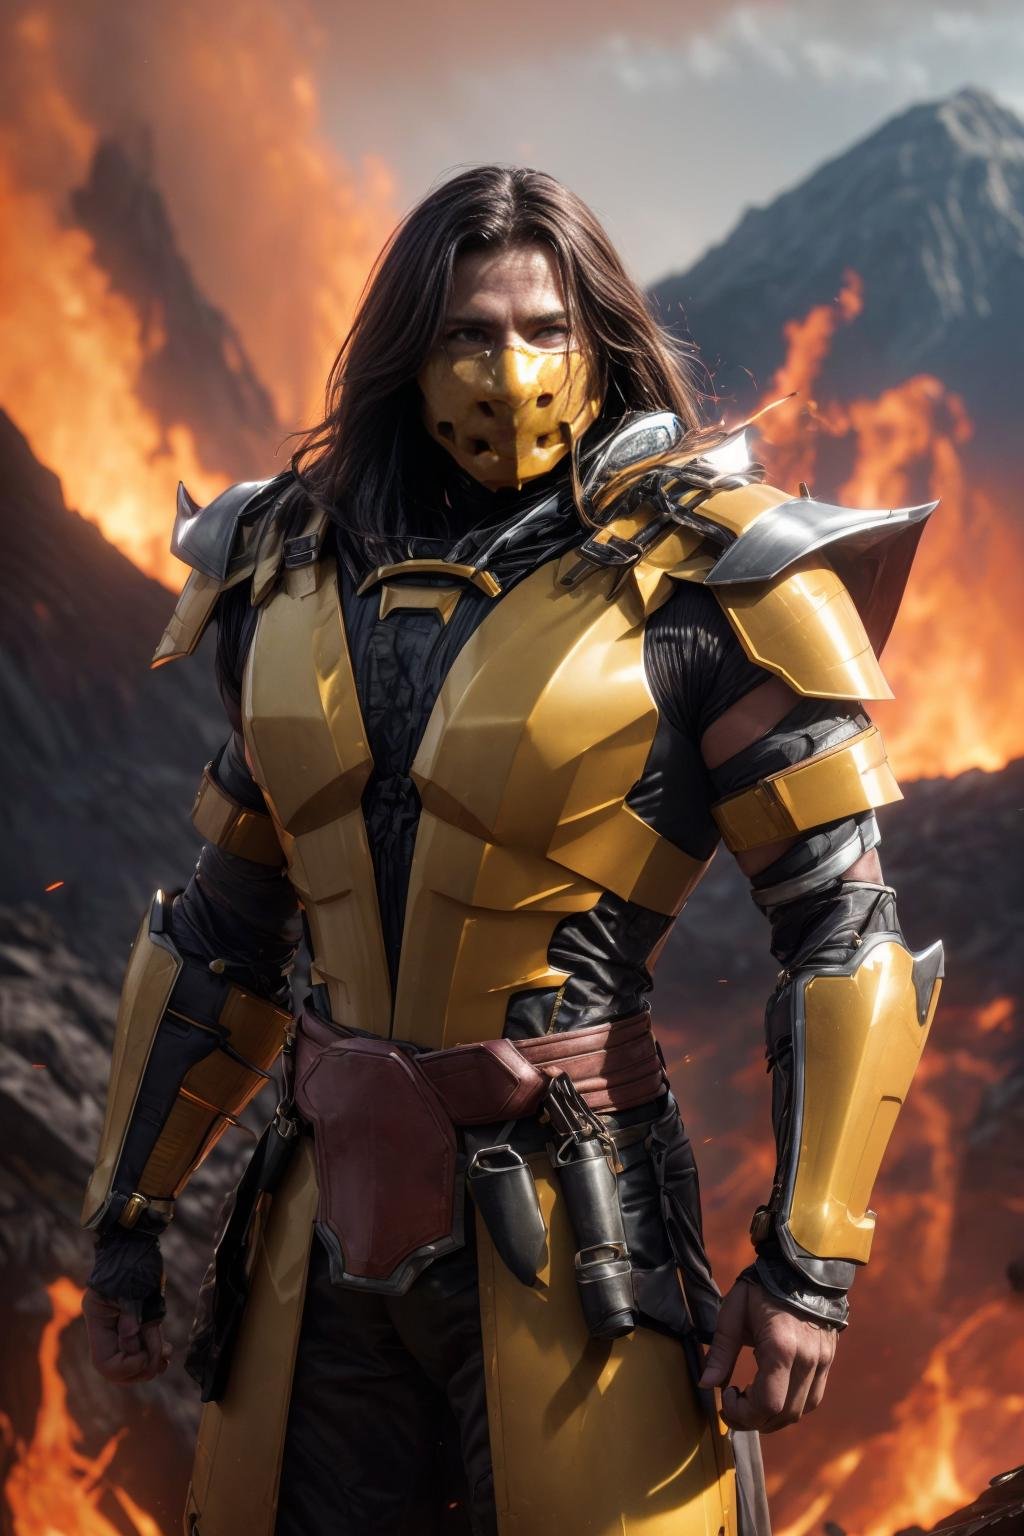 design, interrior, interriordesign <lora:Scorpion_v1:0.7>Masterpiece, best quality, (highly detailed raw photo:1.2), 8k render in octane, volumetric lighting, volumetric shadows  <lora:more_details:0.6>portrait of a man in a  yellow costume, (armor reflexions:1.2), attack posture, long hairsurrounded by fire and lava, mountains with lava in the background 